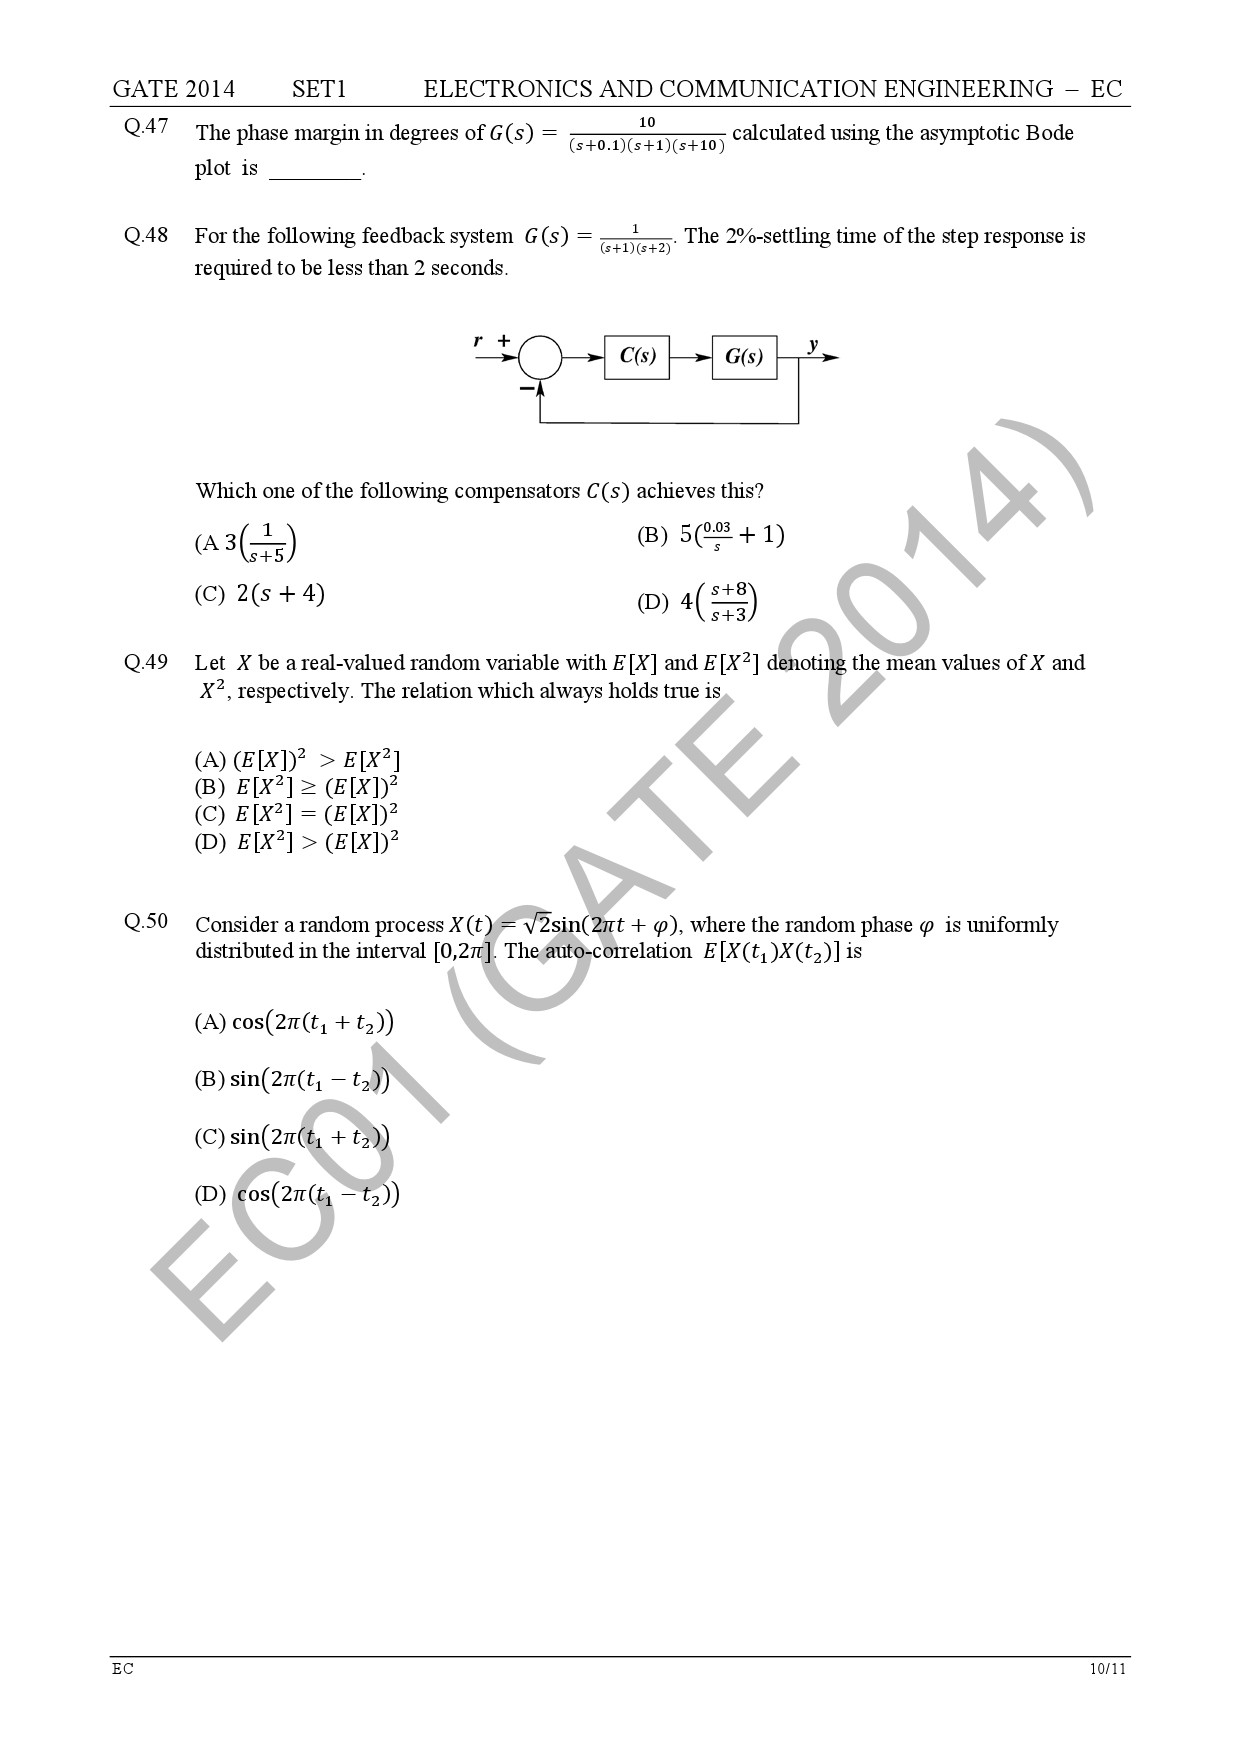 GATE Exam Question Paper 2014 Electronics and Communication Engineering Set 1 16